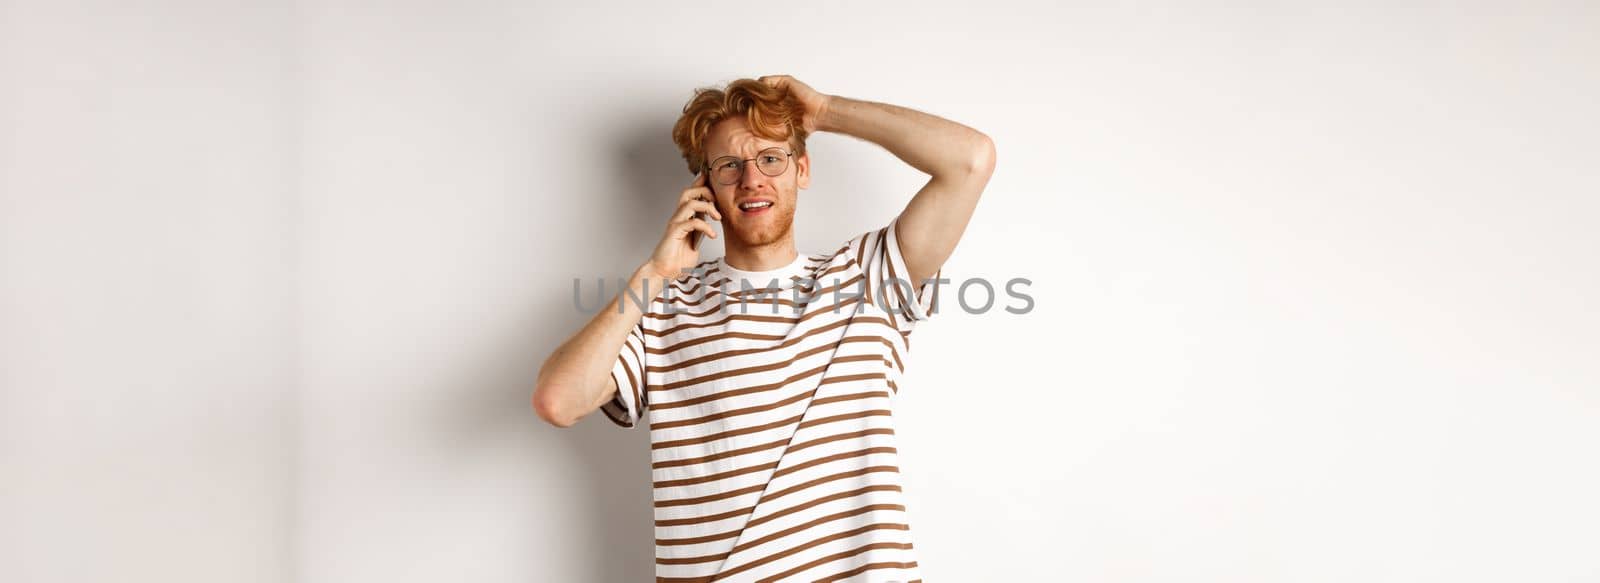 Puzzled redhead guy talking on phone, scratching head and looking confused or indecisive, standing over white background.